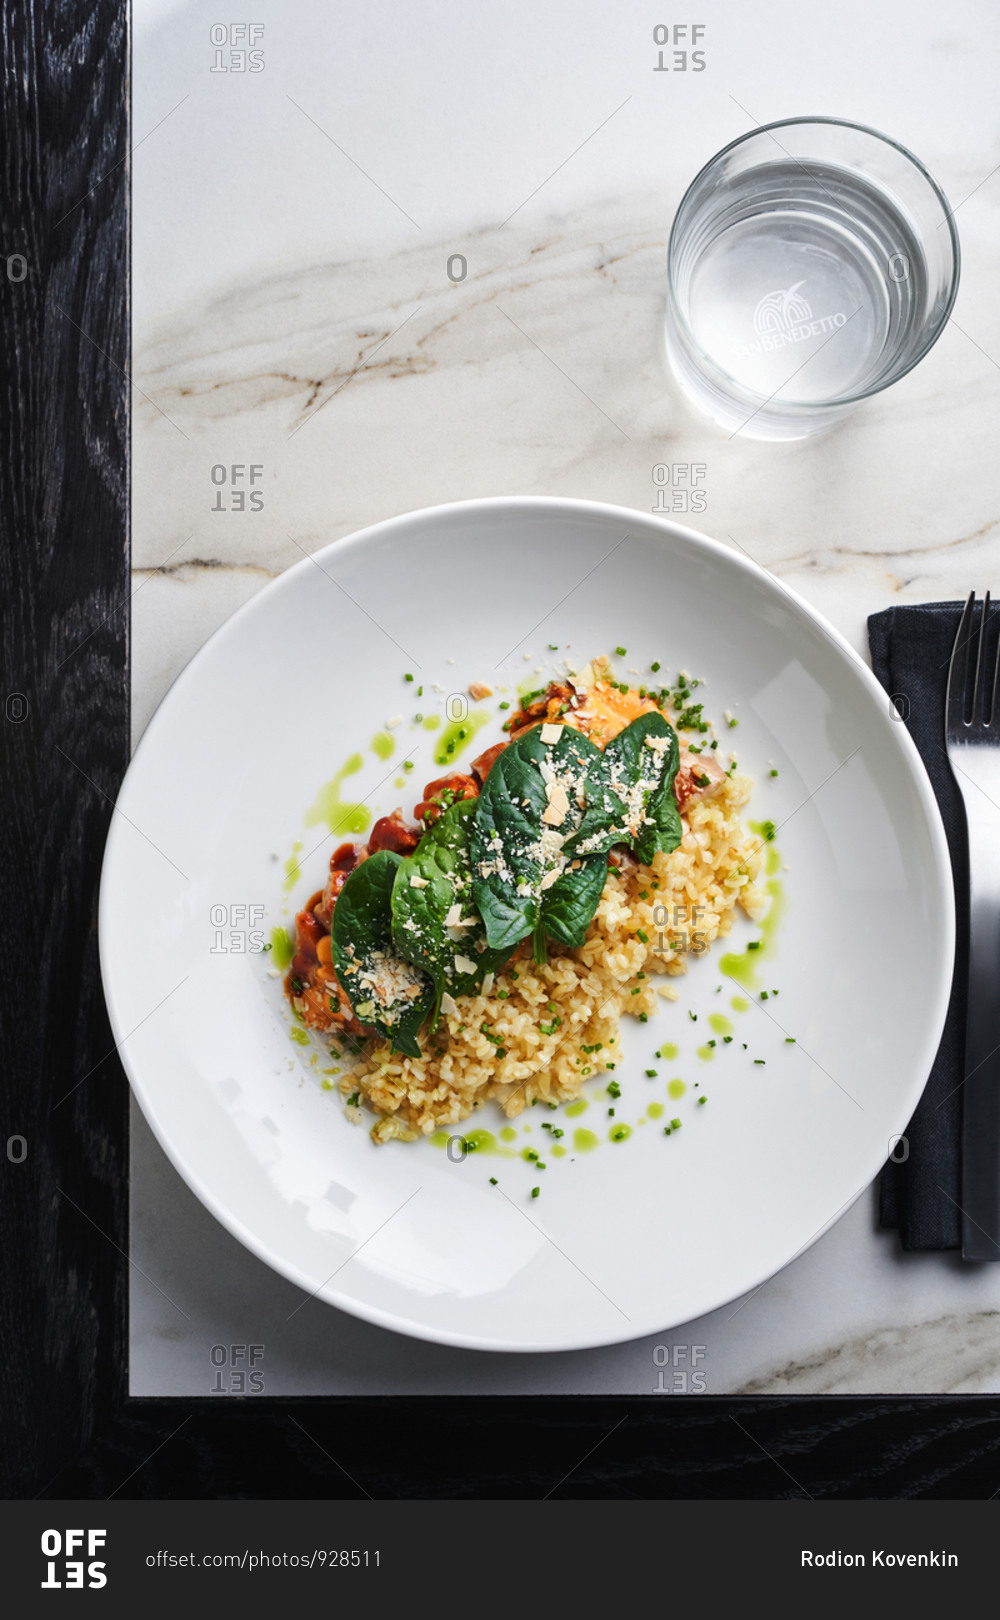 Balanced dish of bulgur, spinach and roasted chicken breast